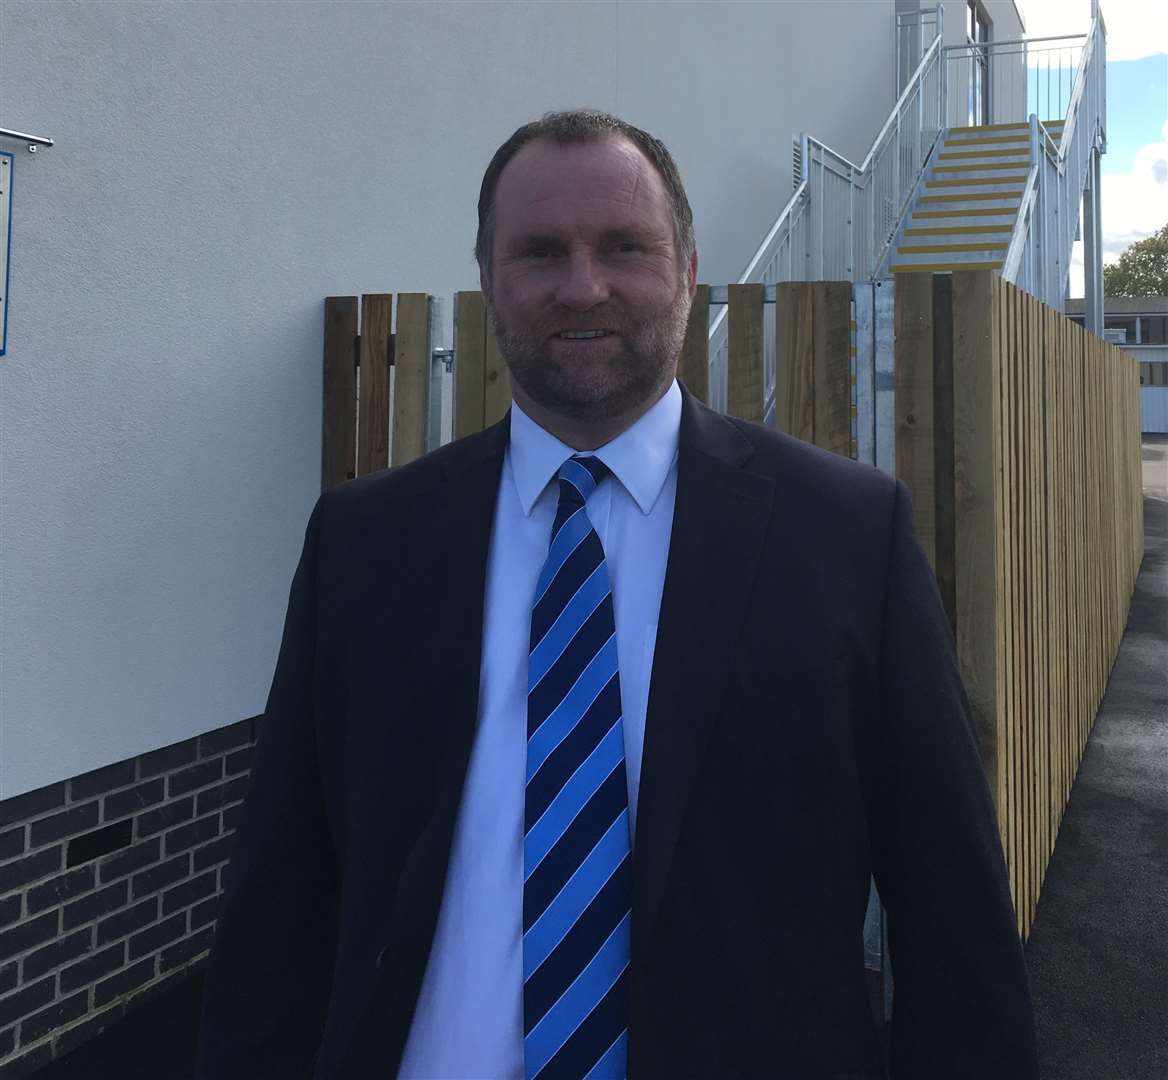 Wentworth Primary School headteacher Paul Langridge has thanked parents and carers for their "amazing" support.